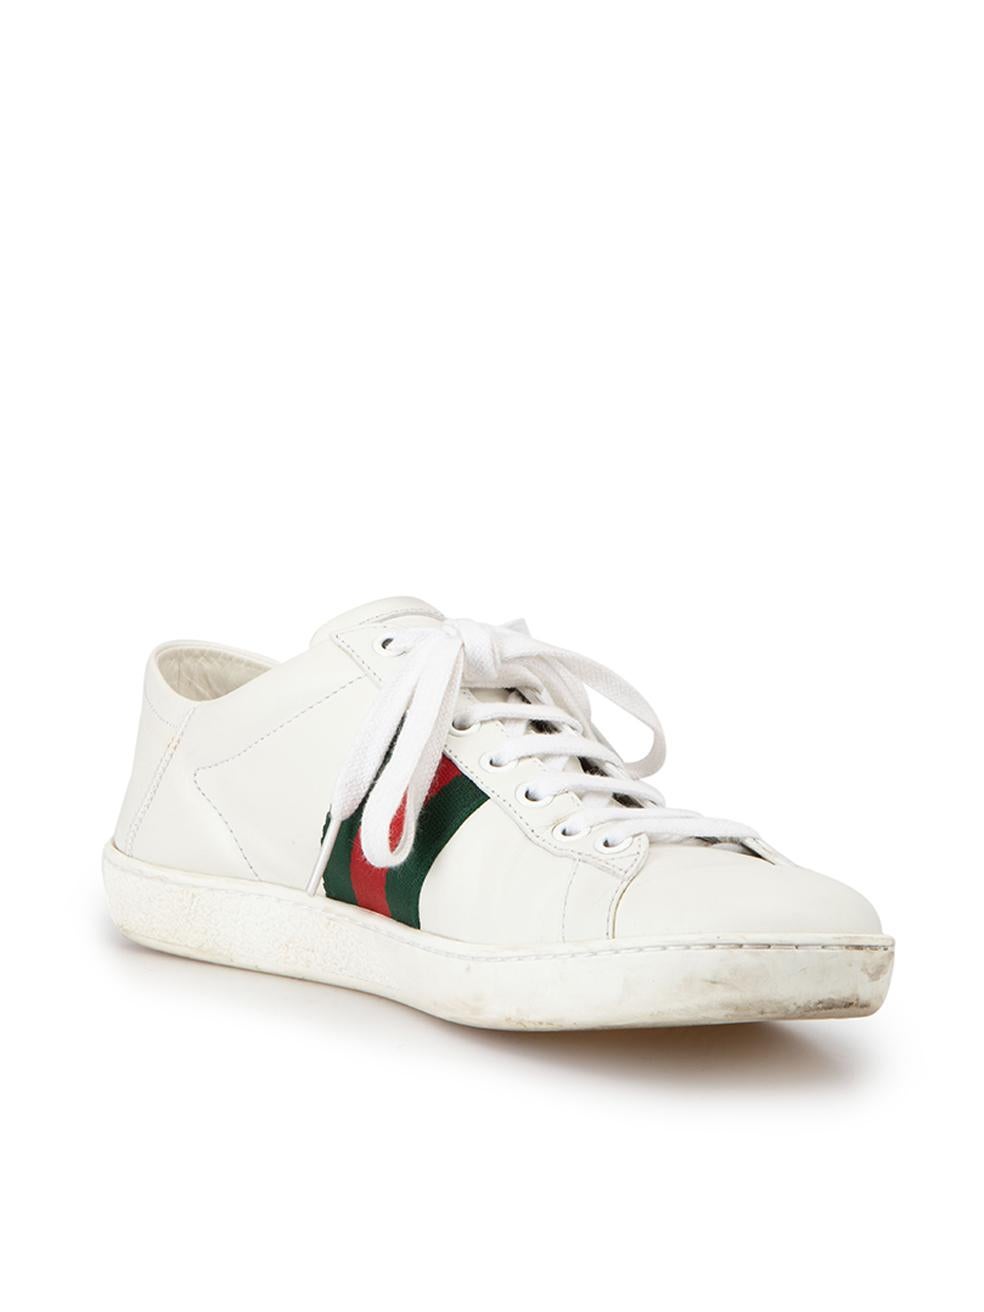 CONDITION is Very good. Minimal wear to trainers is evident. Minimal wear to the leather exterior and there are marks around the midsole. There is also visible wear to the outsole and creasing to the vamp on this used Gucci designer resale item.